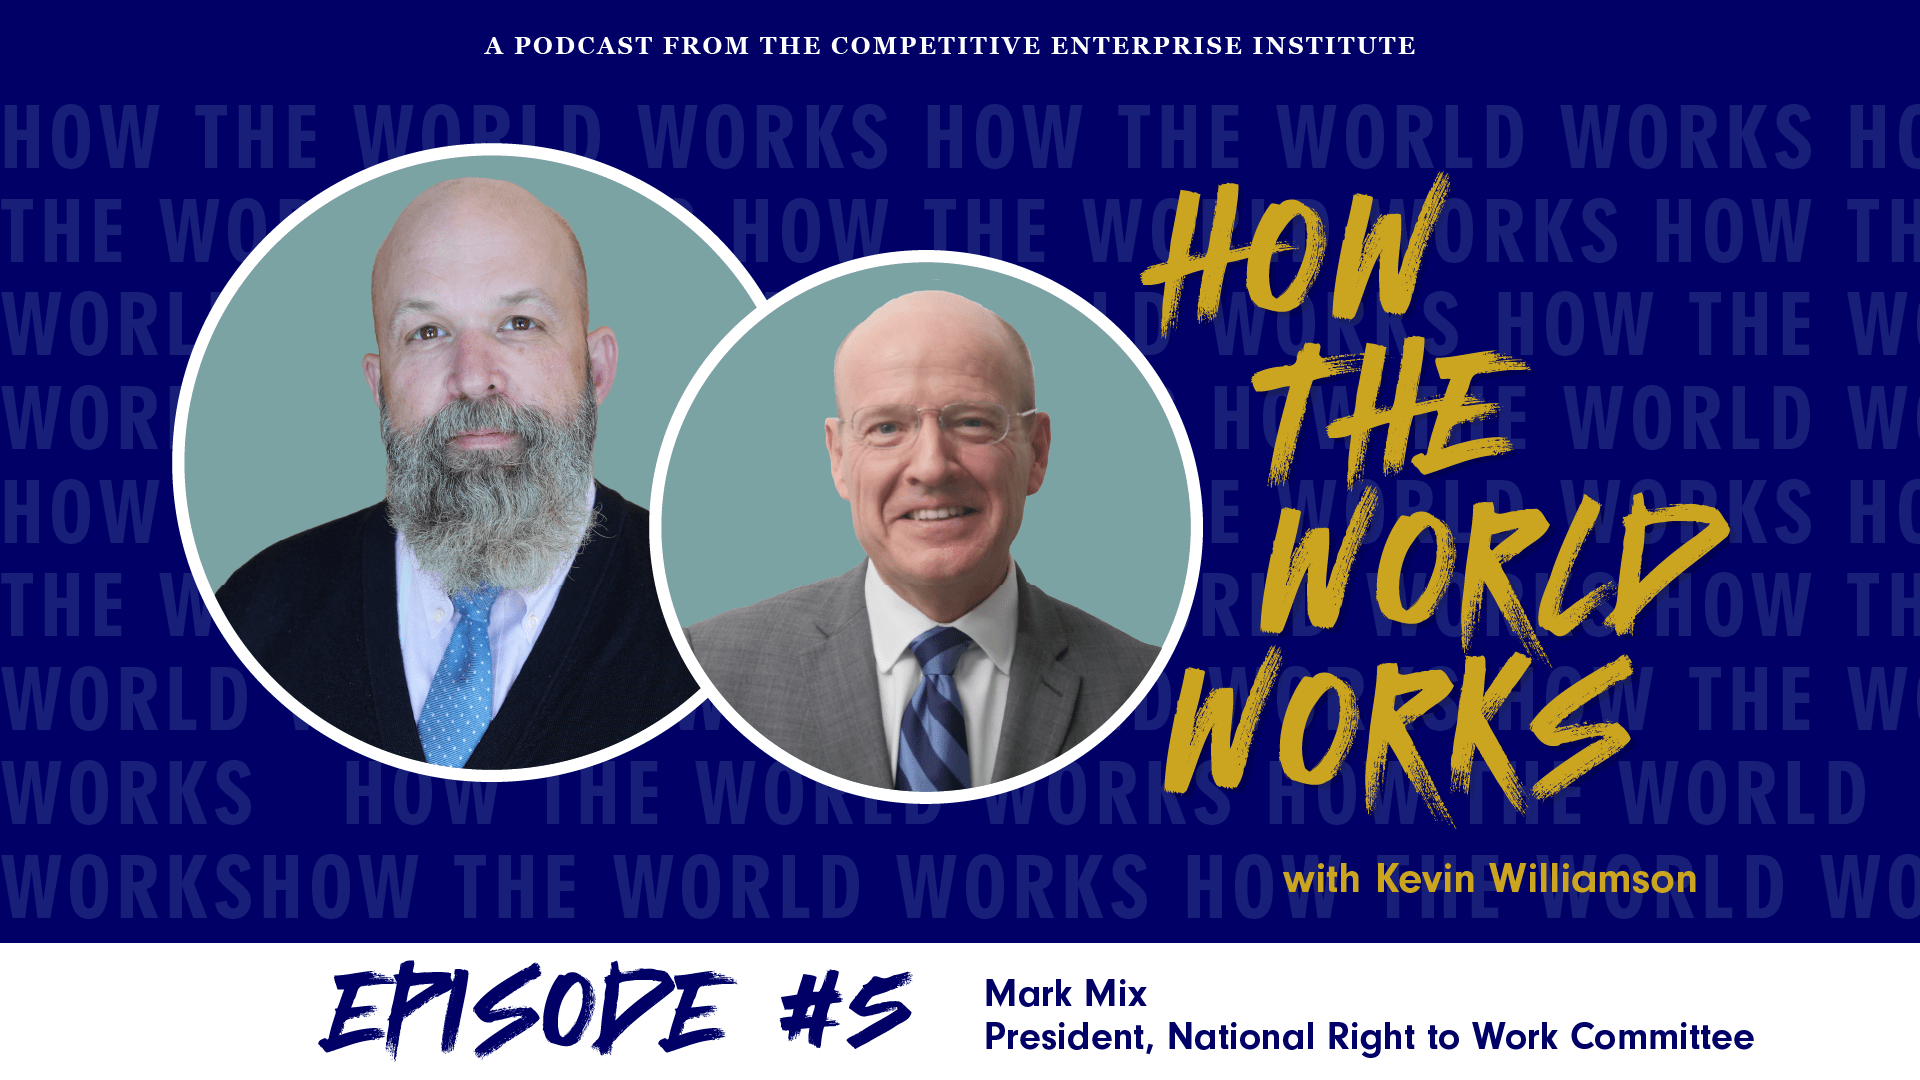 How the World Works Podcast with Guest Mark Mix